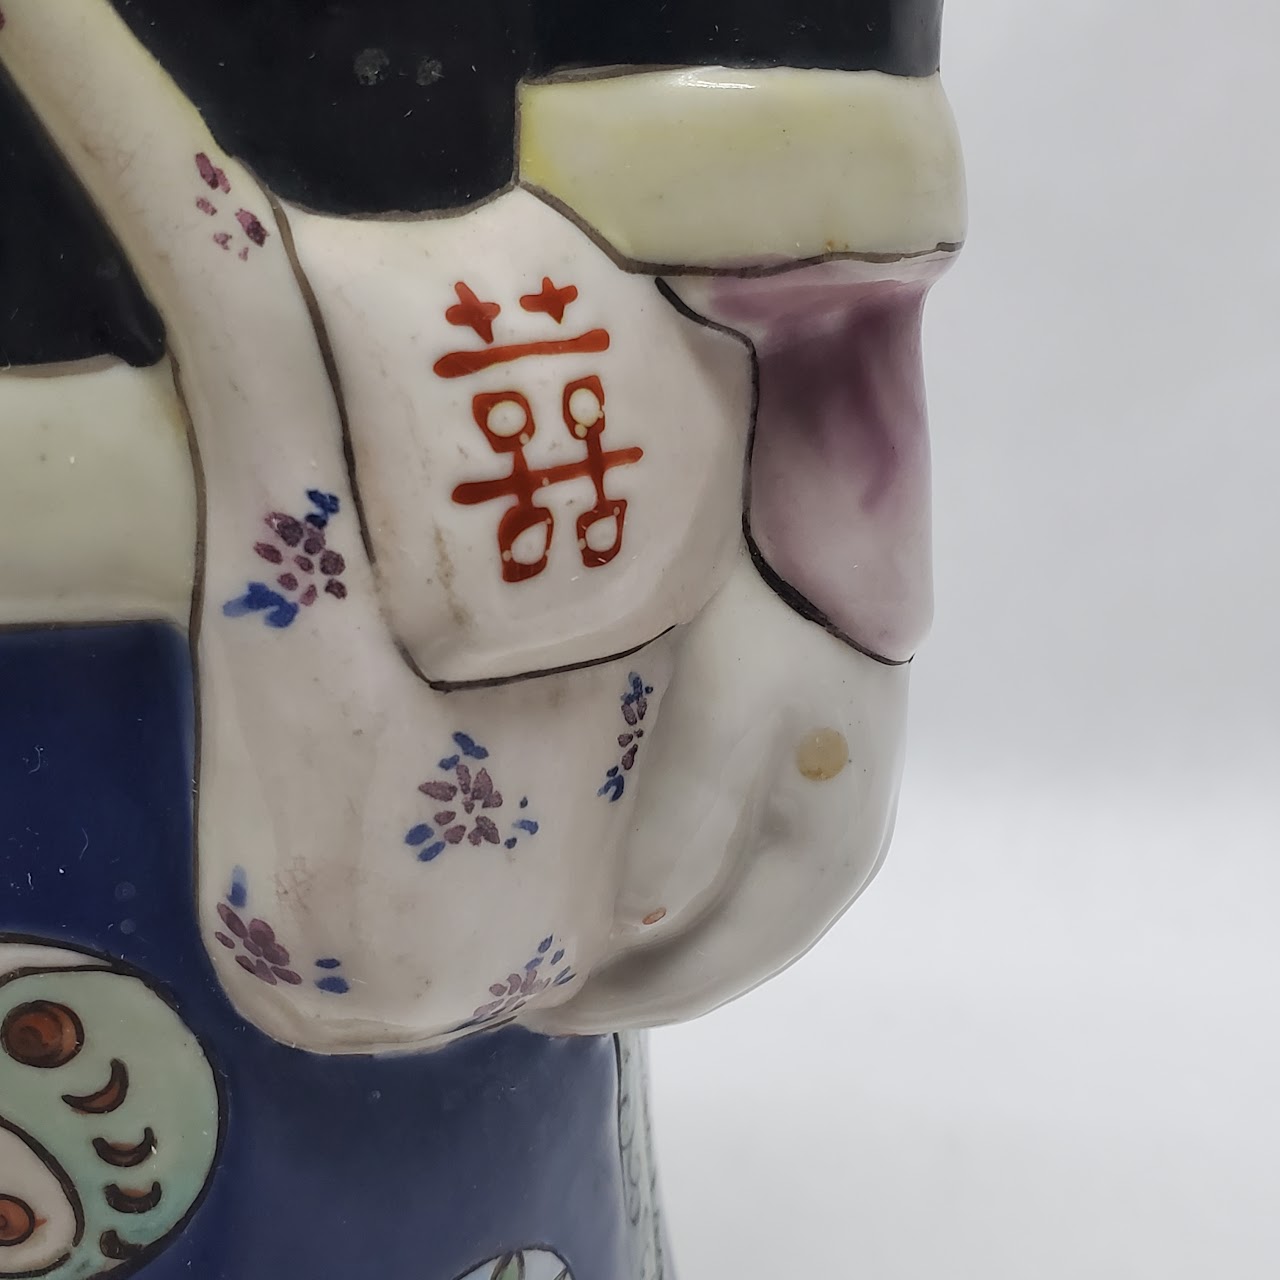 Chinese Porcelain Vessel Figurine